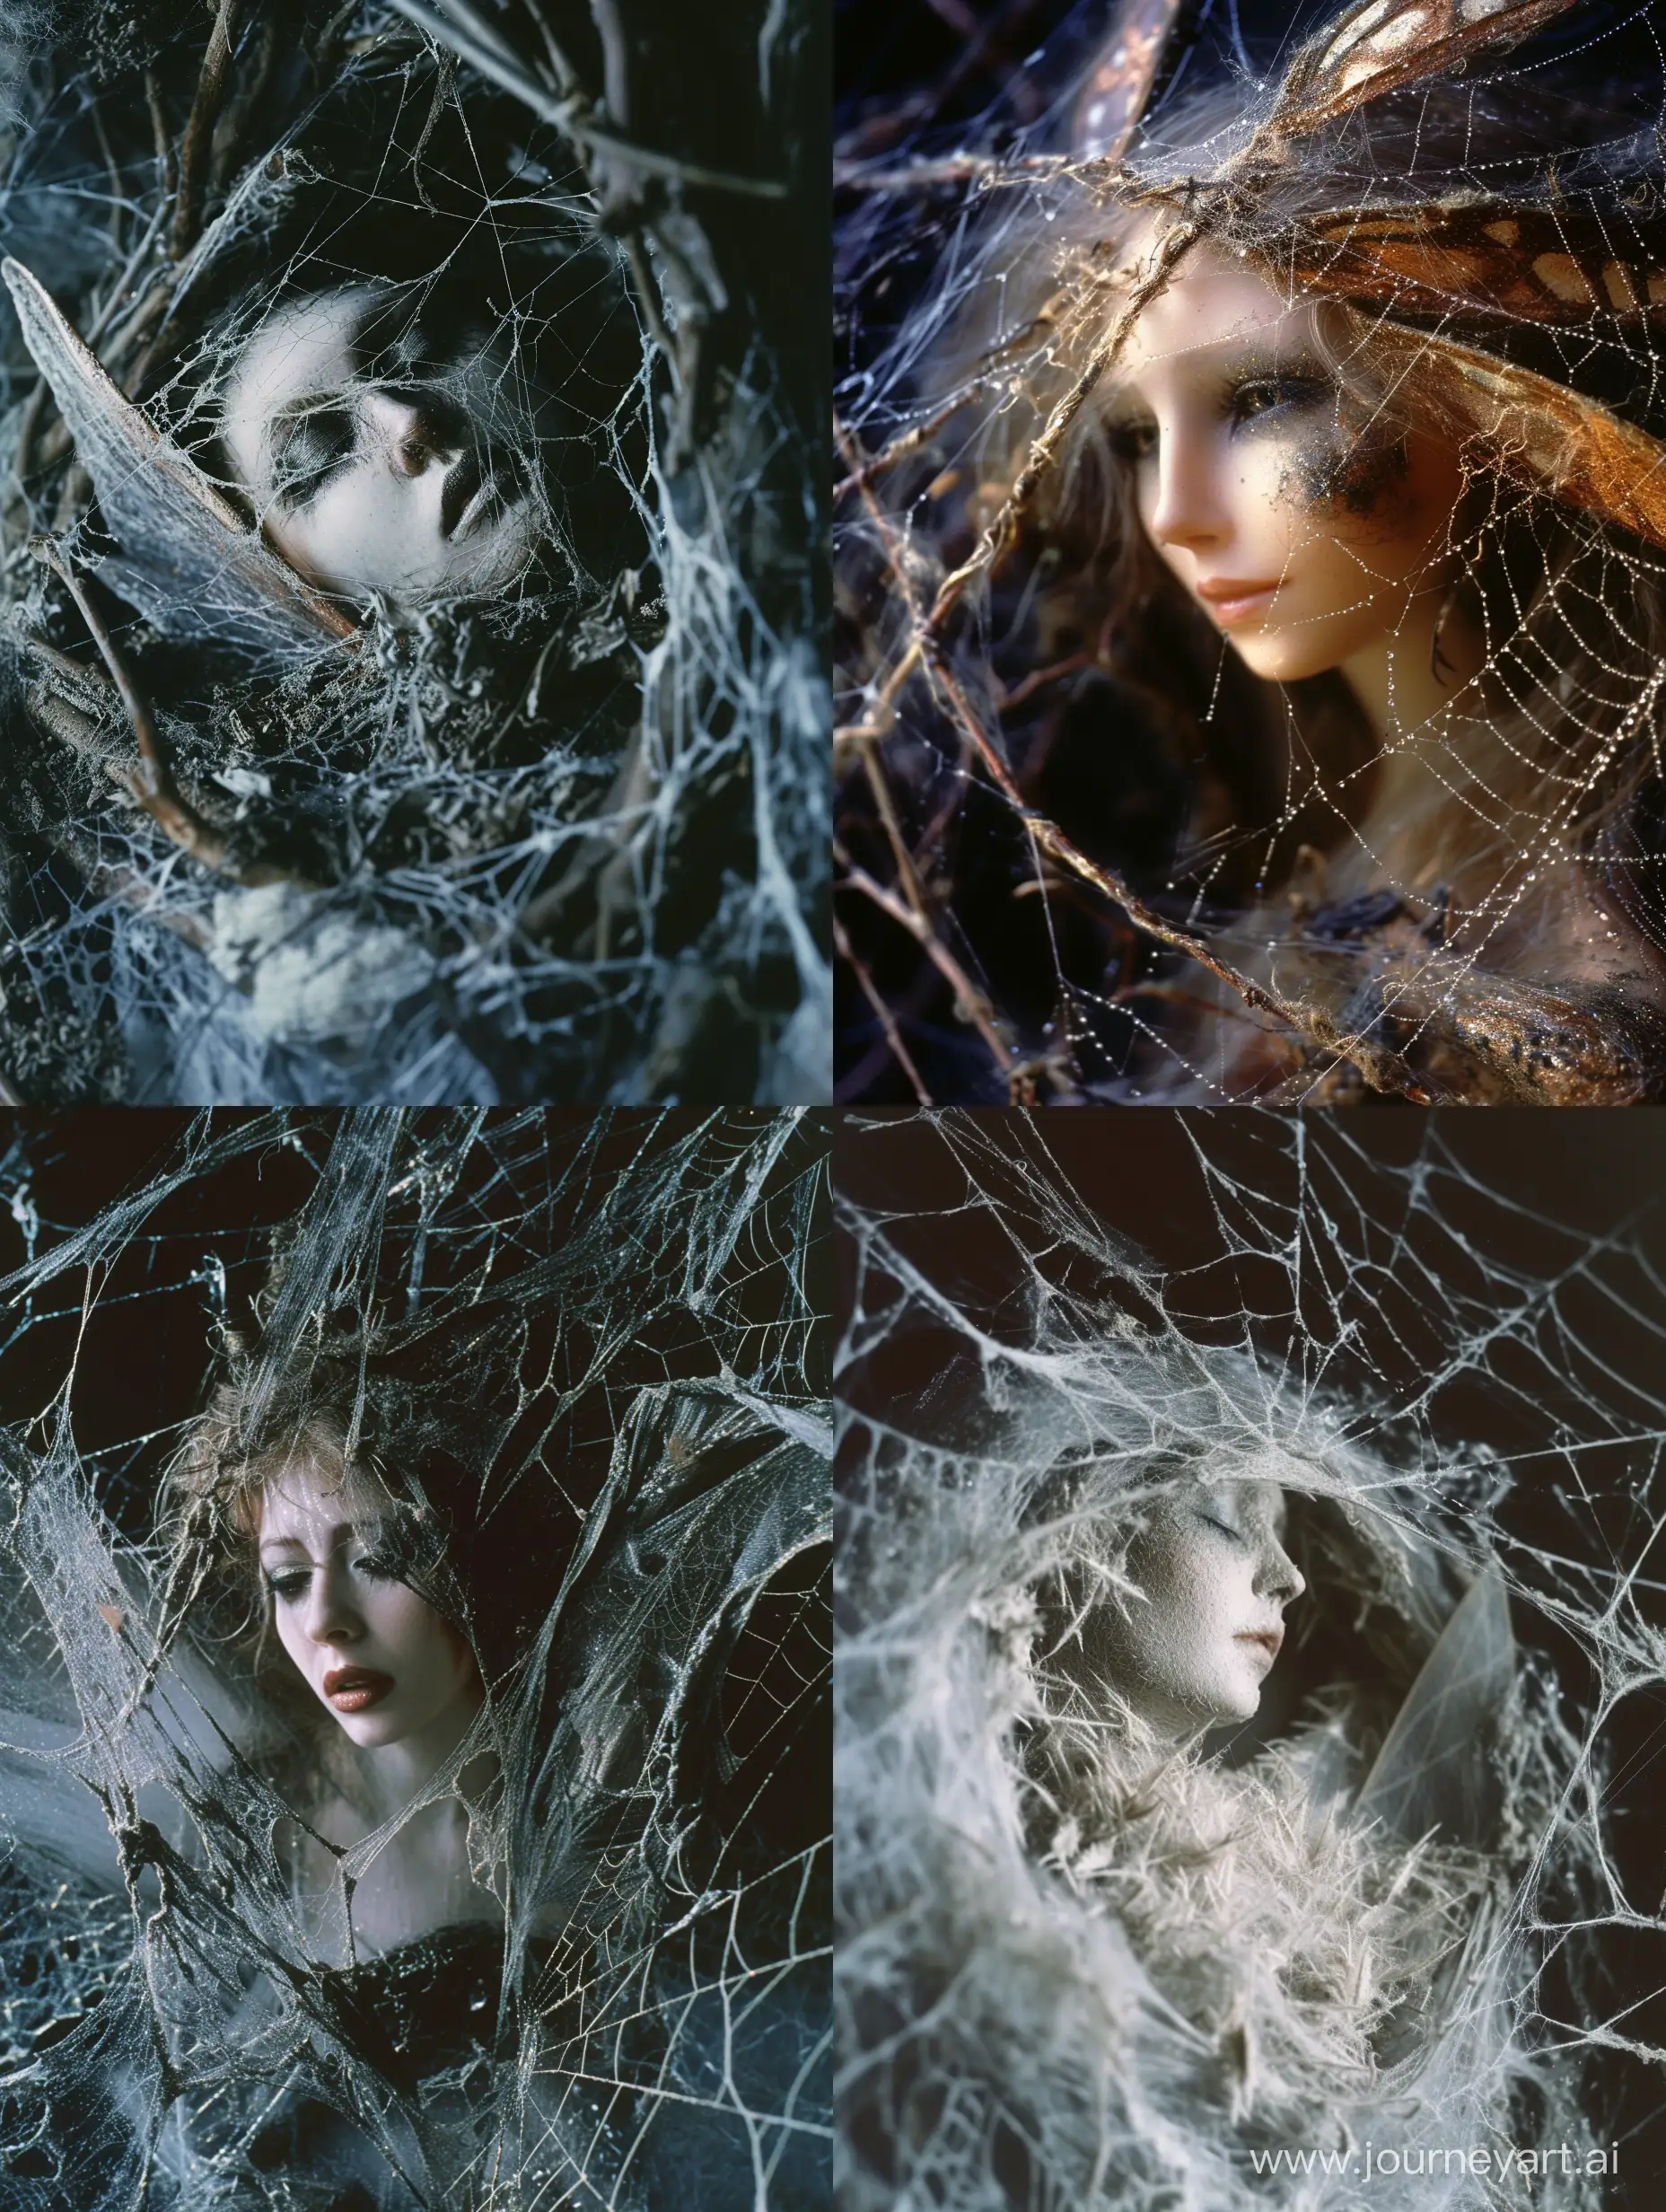 Captivating-Horror-Core-Image-Enchanting-Fairy-Trapped-in-Sinister-Spiderweb